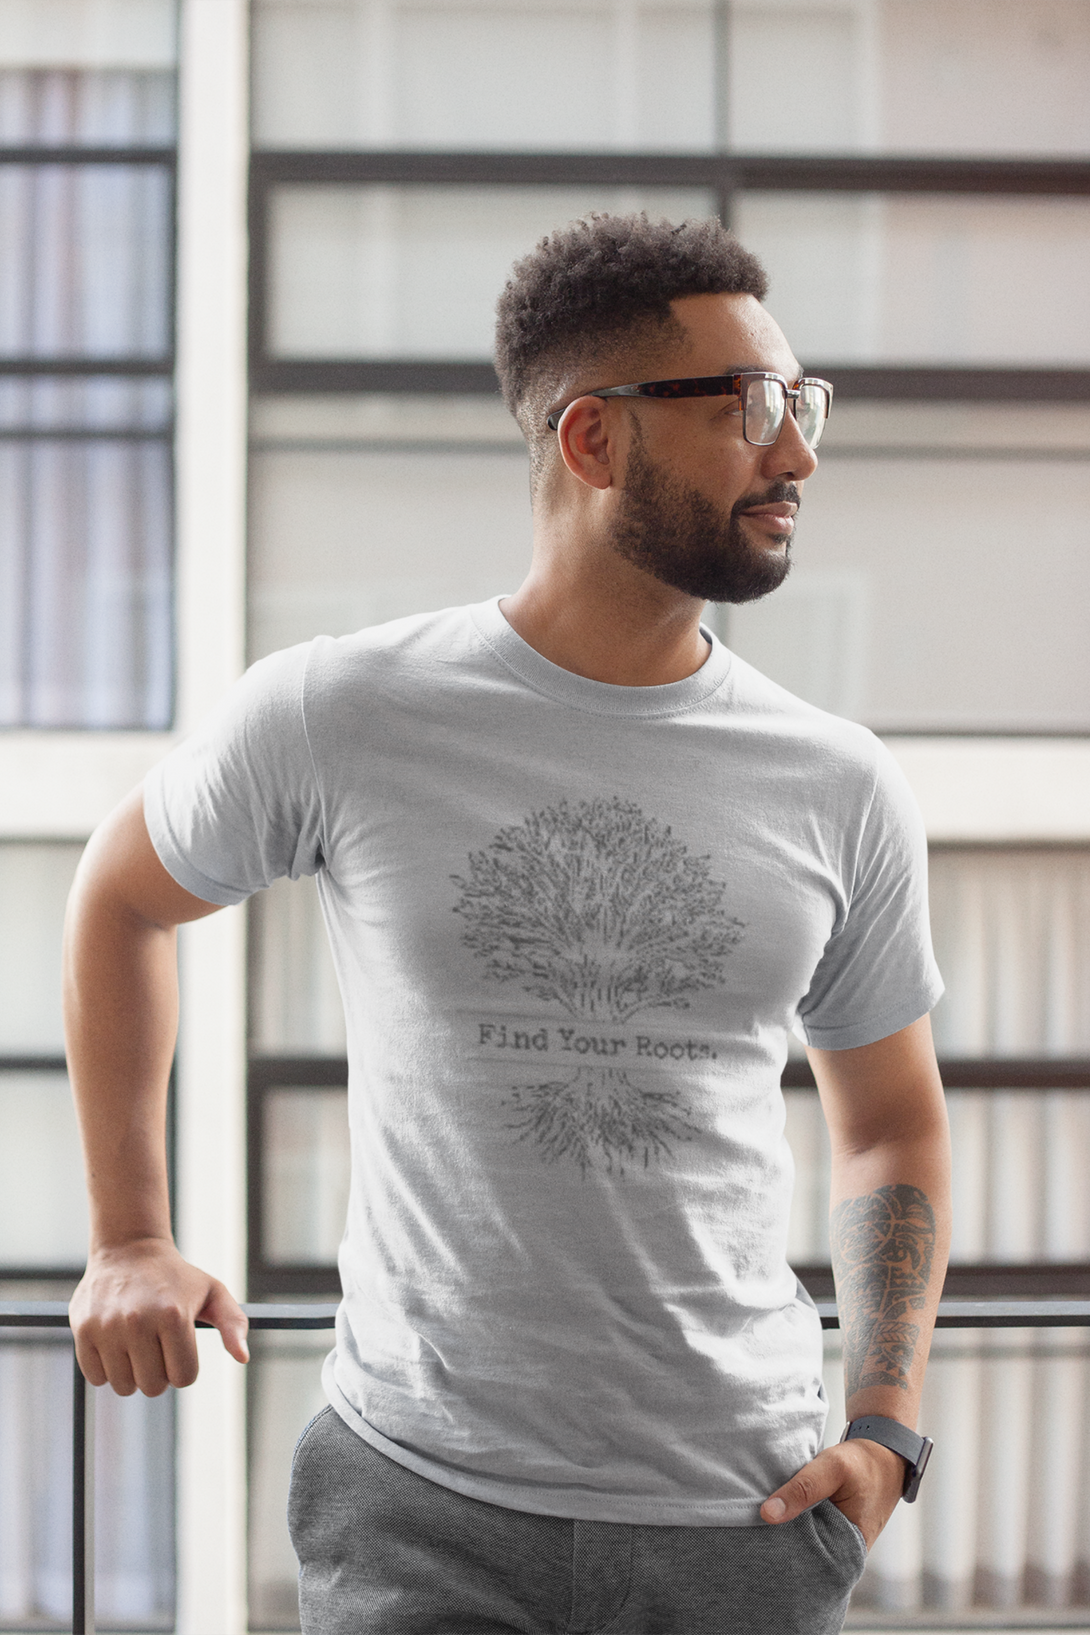 Find Your Roots Printed T-Shirt For Men - WowWaves - 3